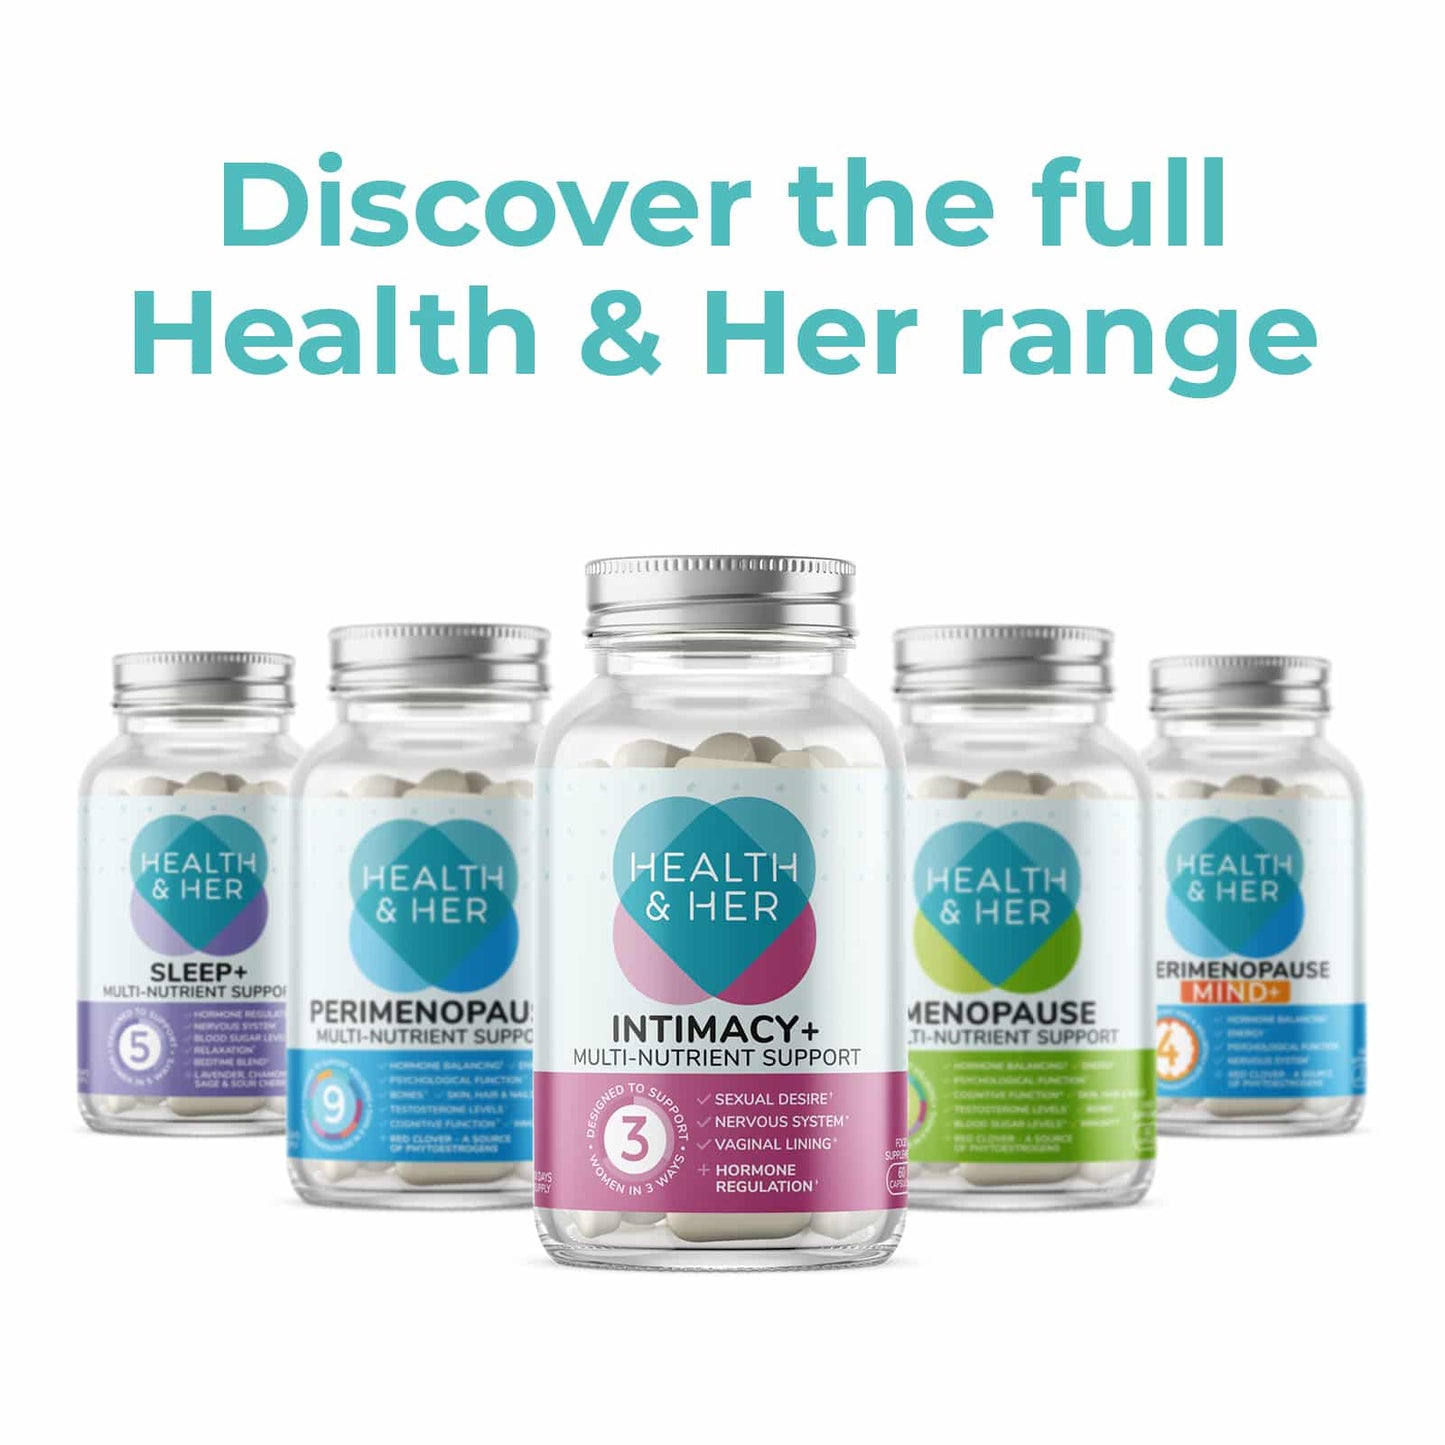 Health & Her Intimacy+ Multi-Nutrient Support Health & Her